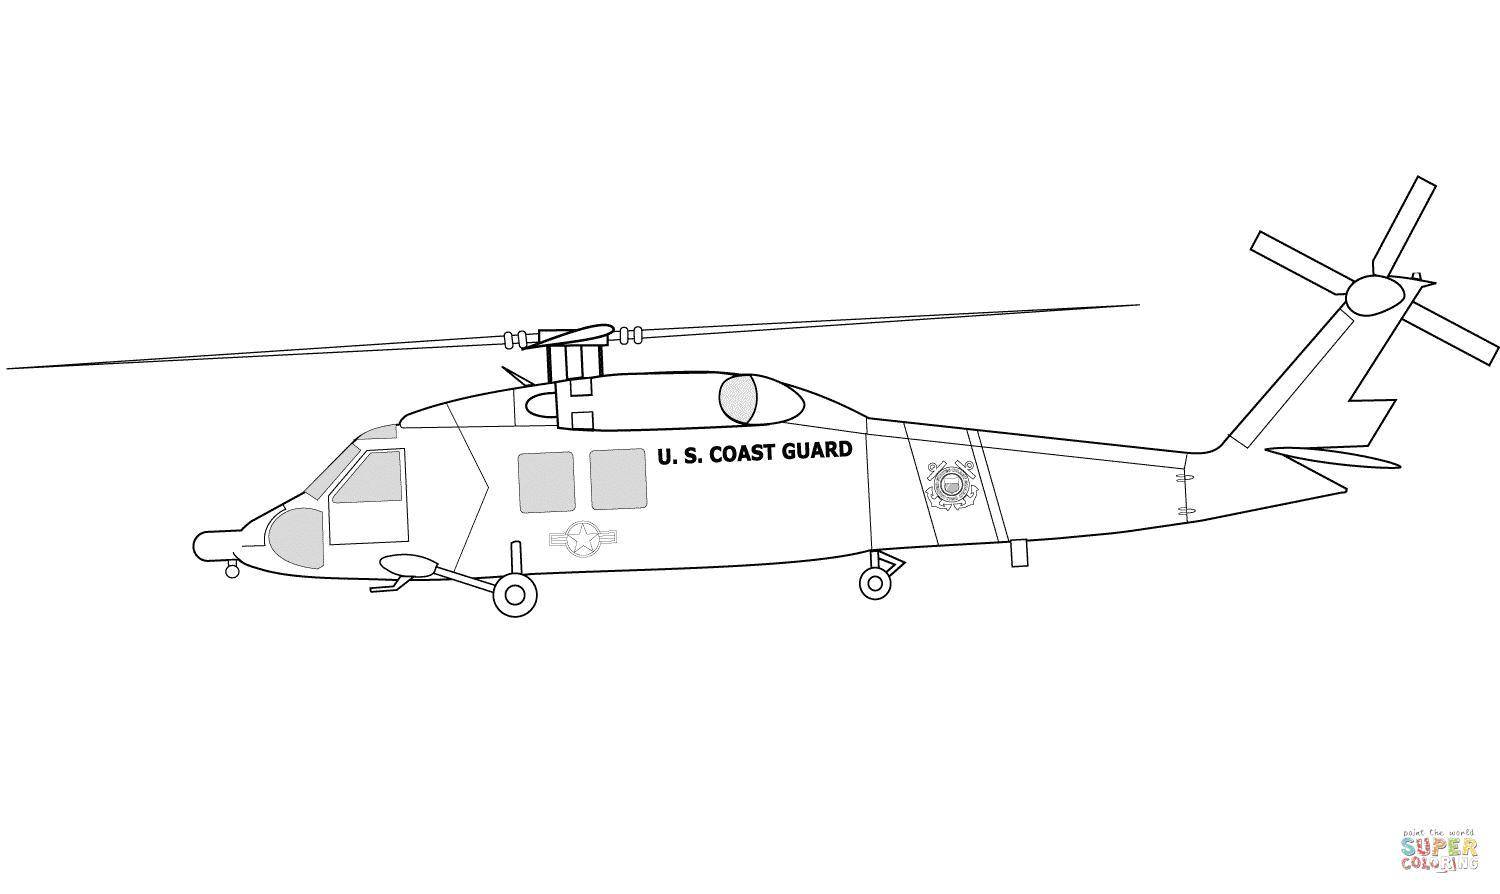 Coloring Helicopter. Category Helicopters. Tags:  Gunship.